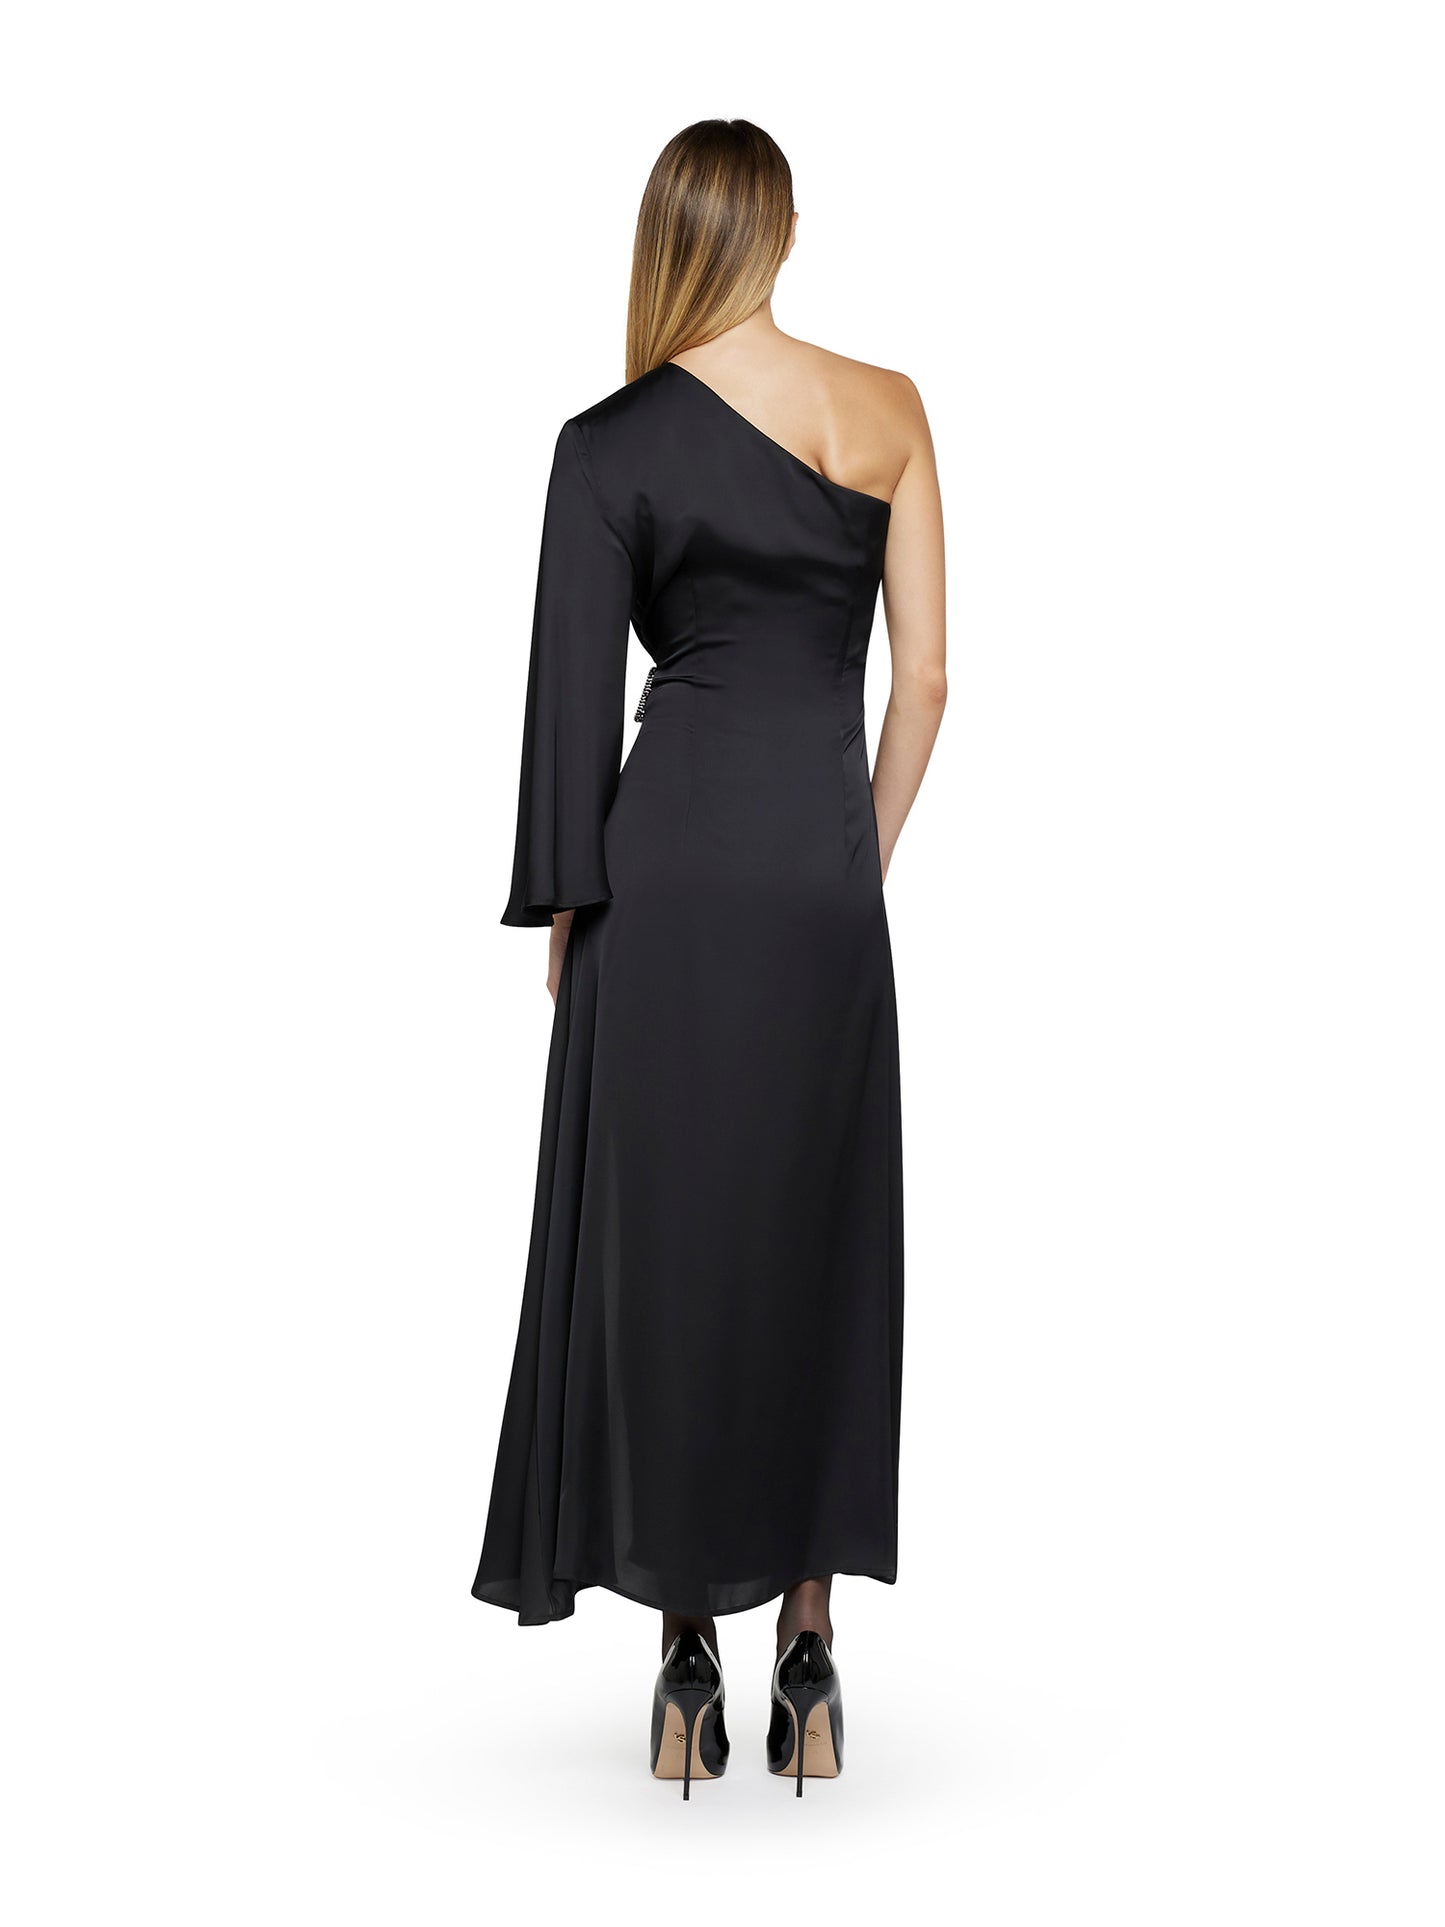 One-shoulder dress in fluid satin with jewelled buckle